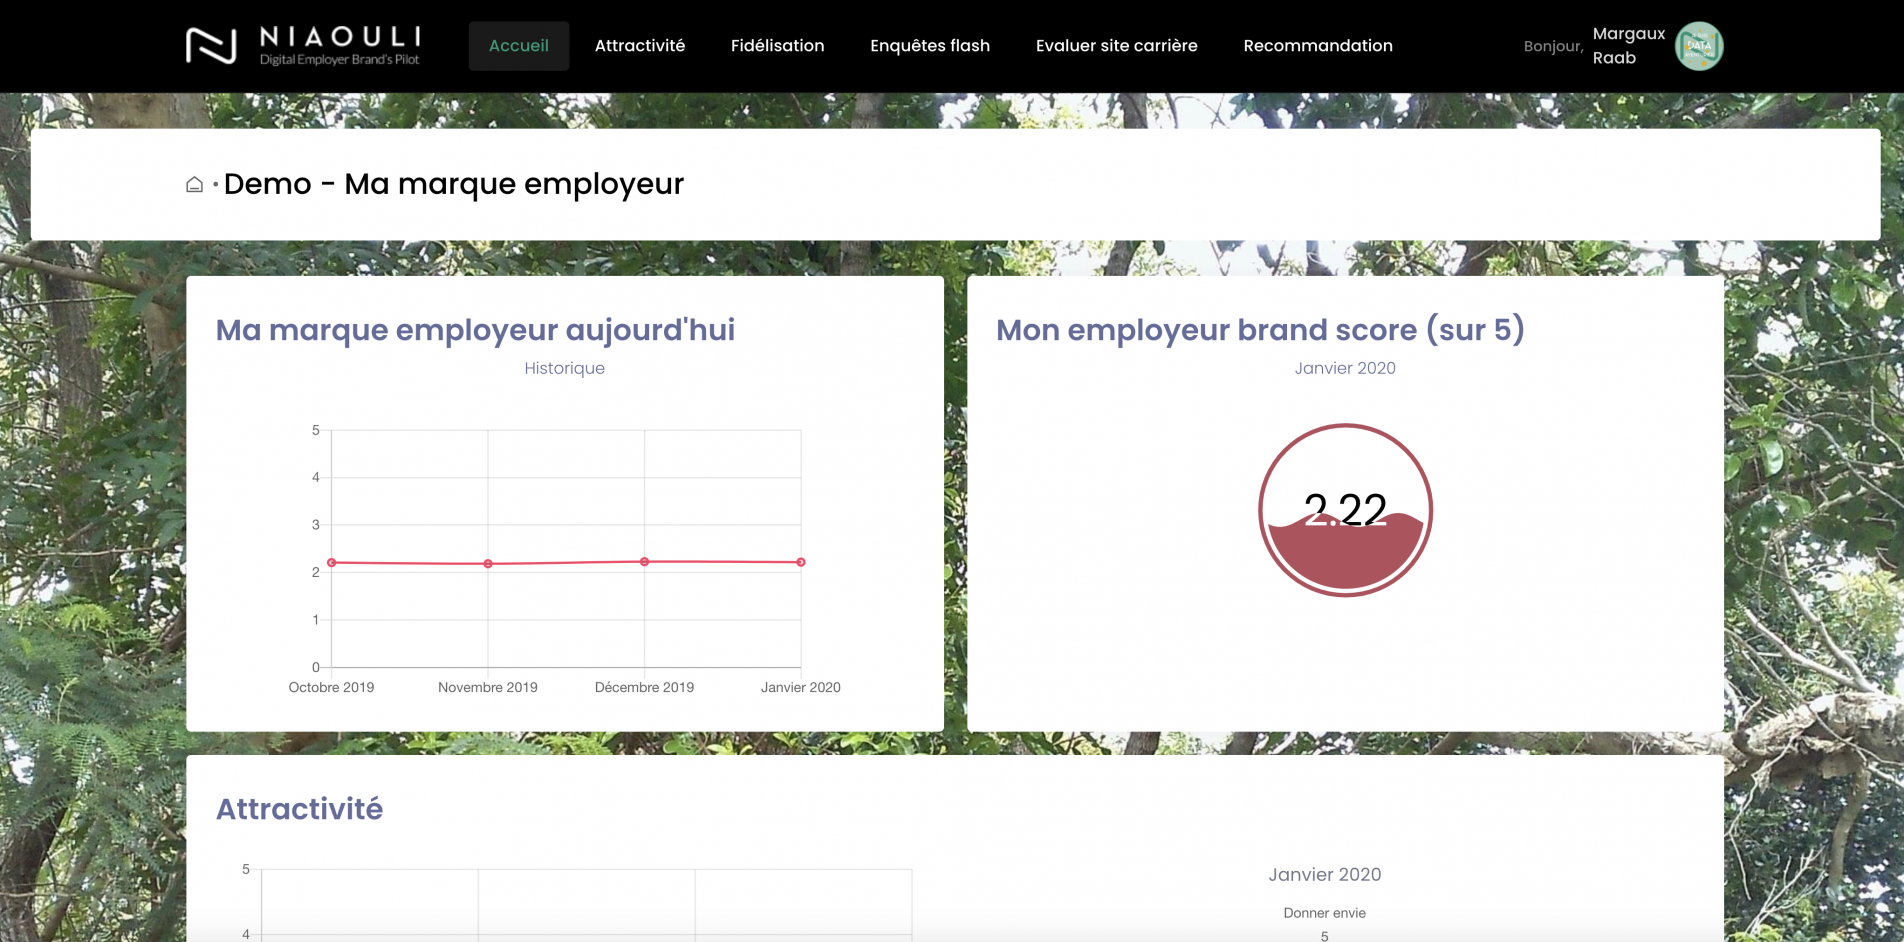 Our offer to evaluate the employer brand